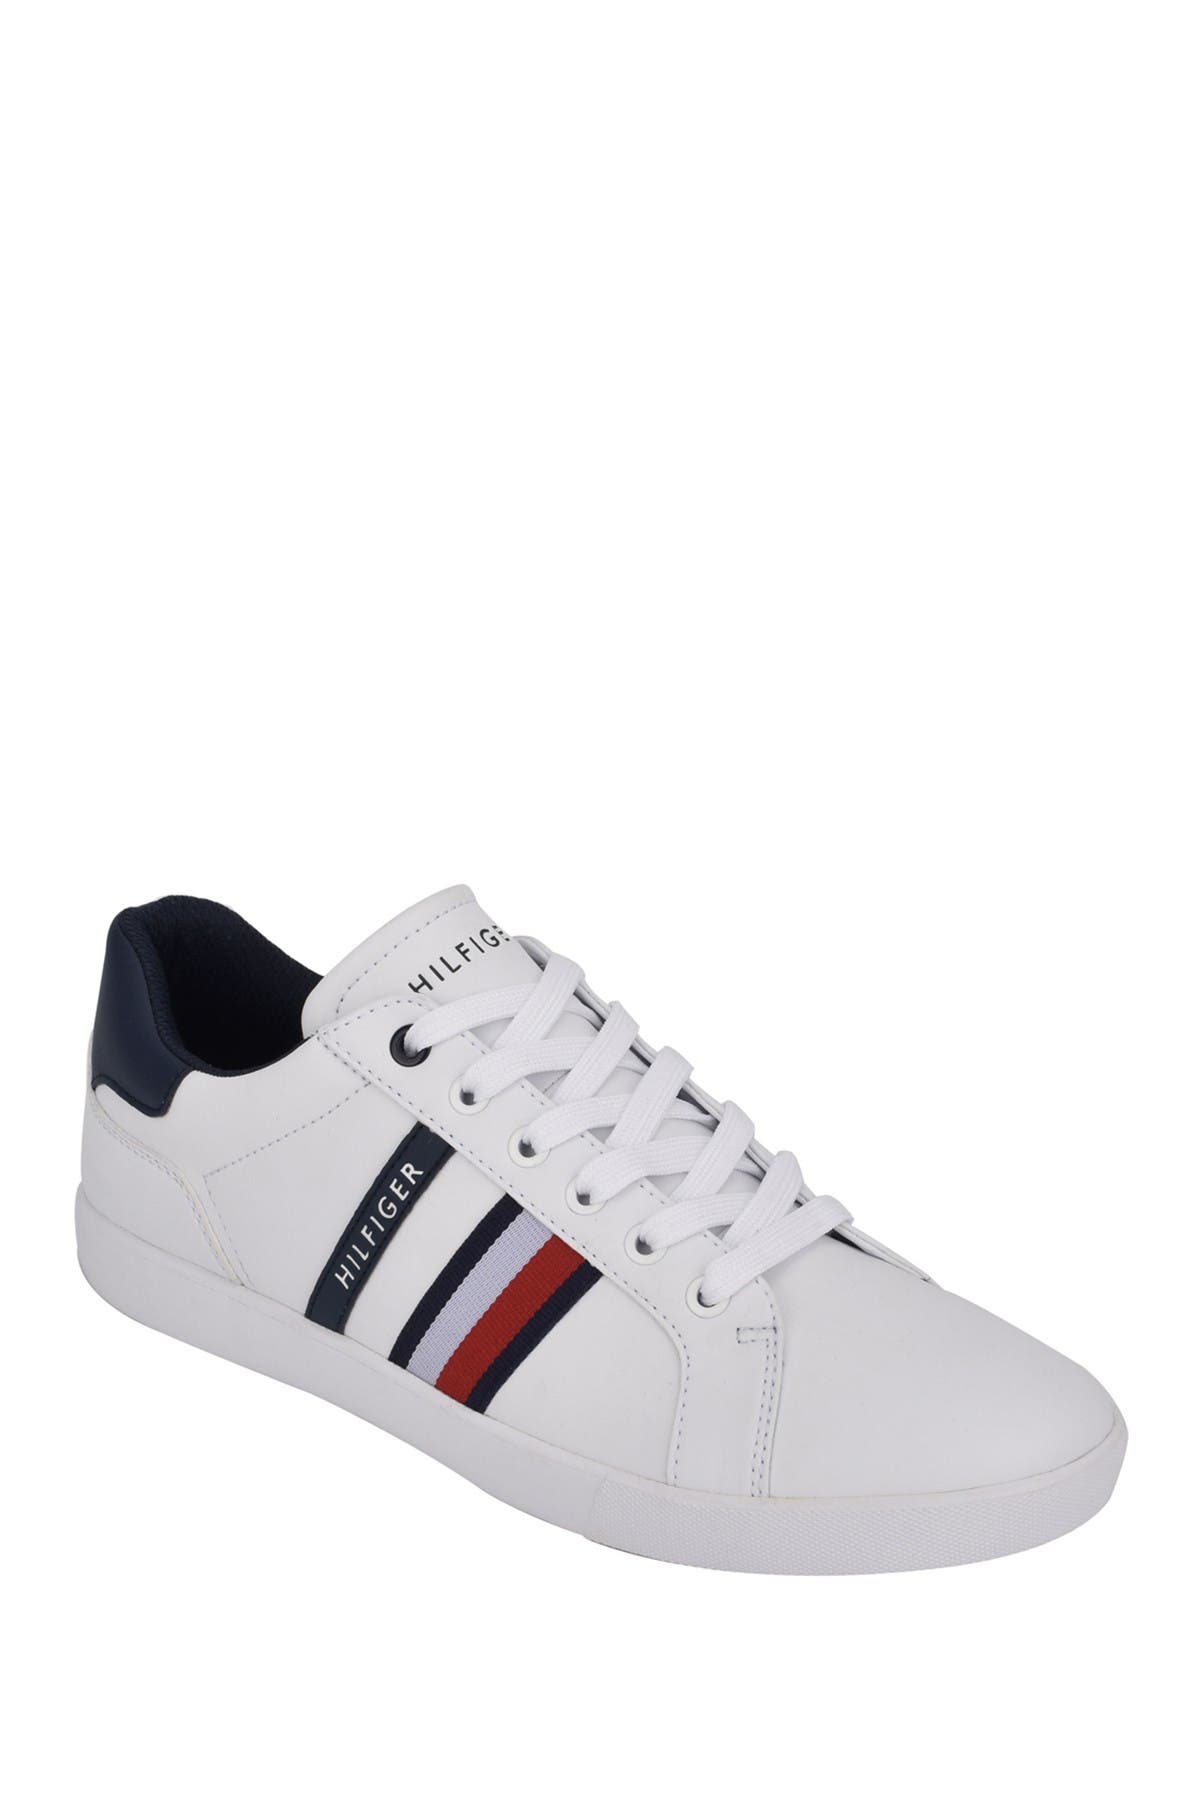 Tommy Hilfiger | Thyme Sneaker 